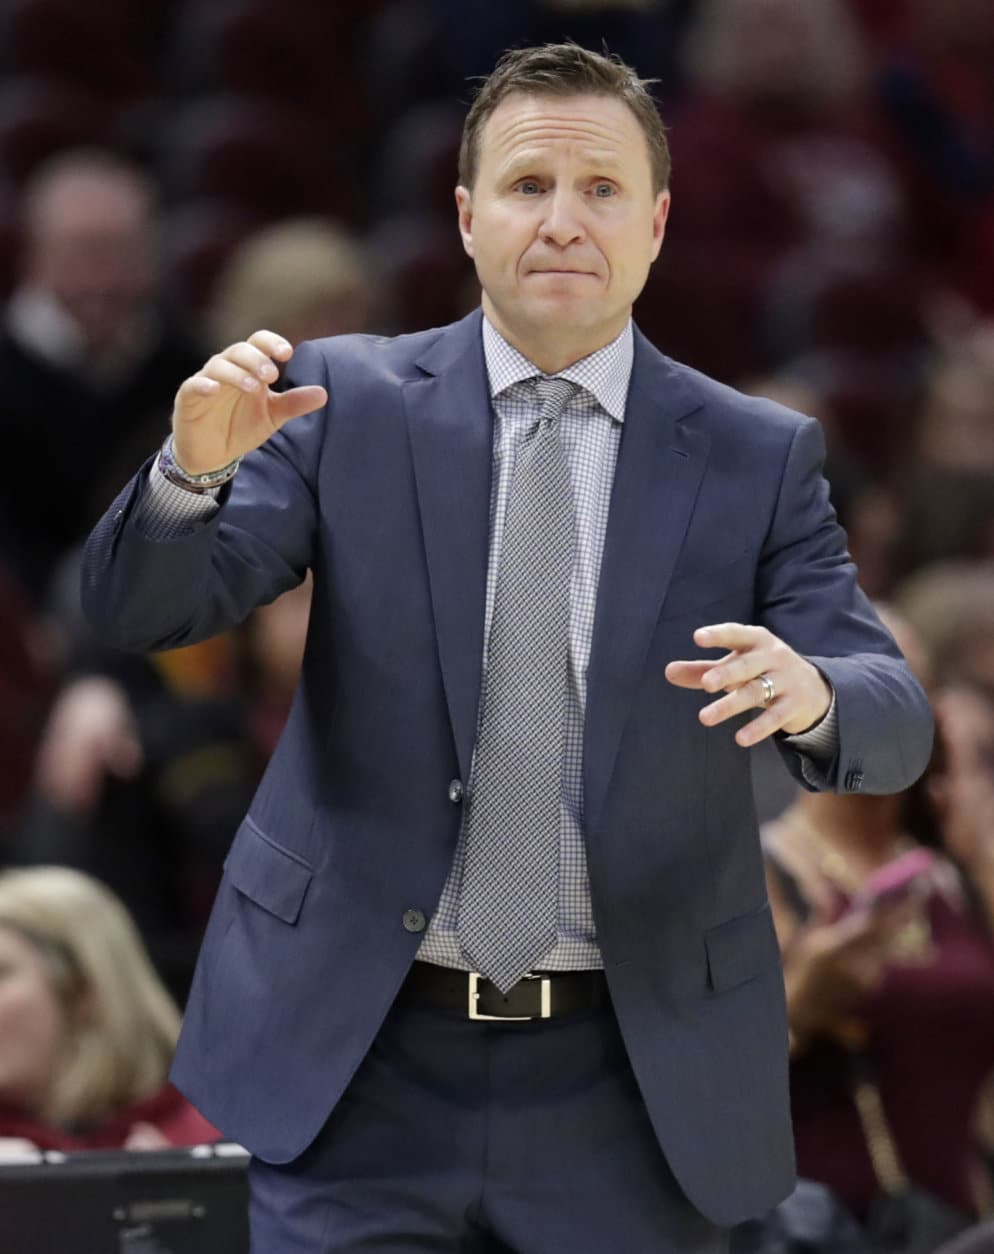 Washington Wizards coach Scott Brooks watches late in the second half of the team's NBA basketball game against the Cleveland Cavaliers, Tuesday, Jan. 29, 2019, in Cleveland. The Cavaliers won 116-113. (AP Photo/Tony Dejak)